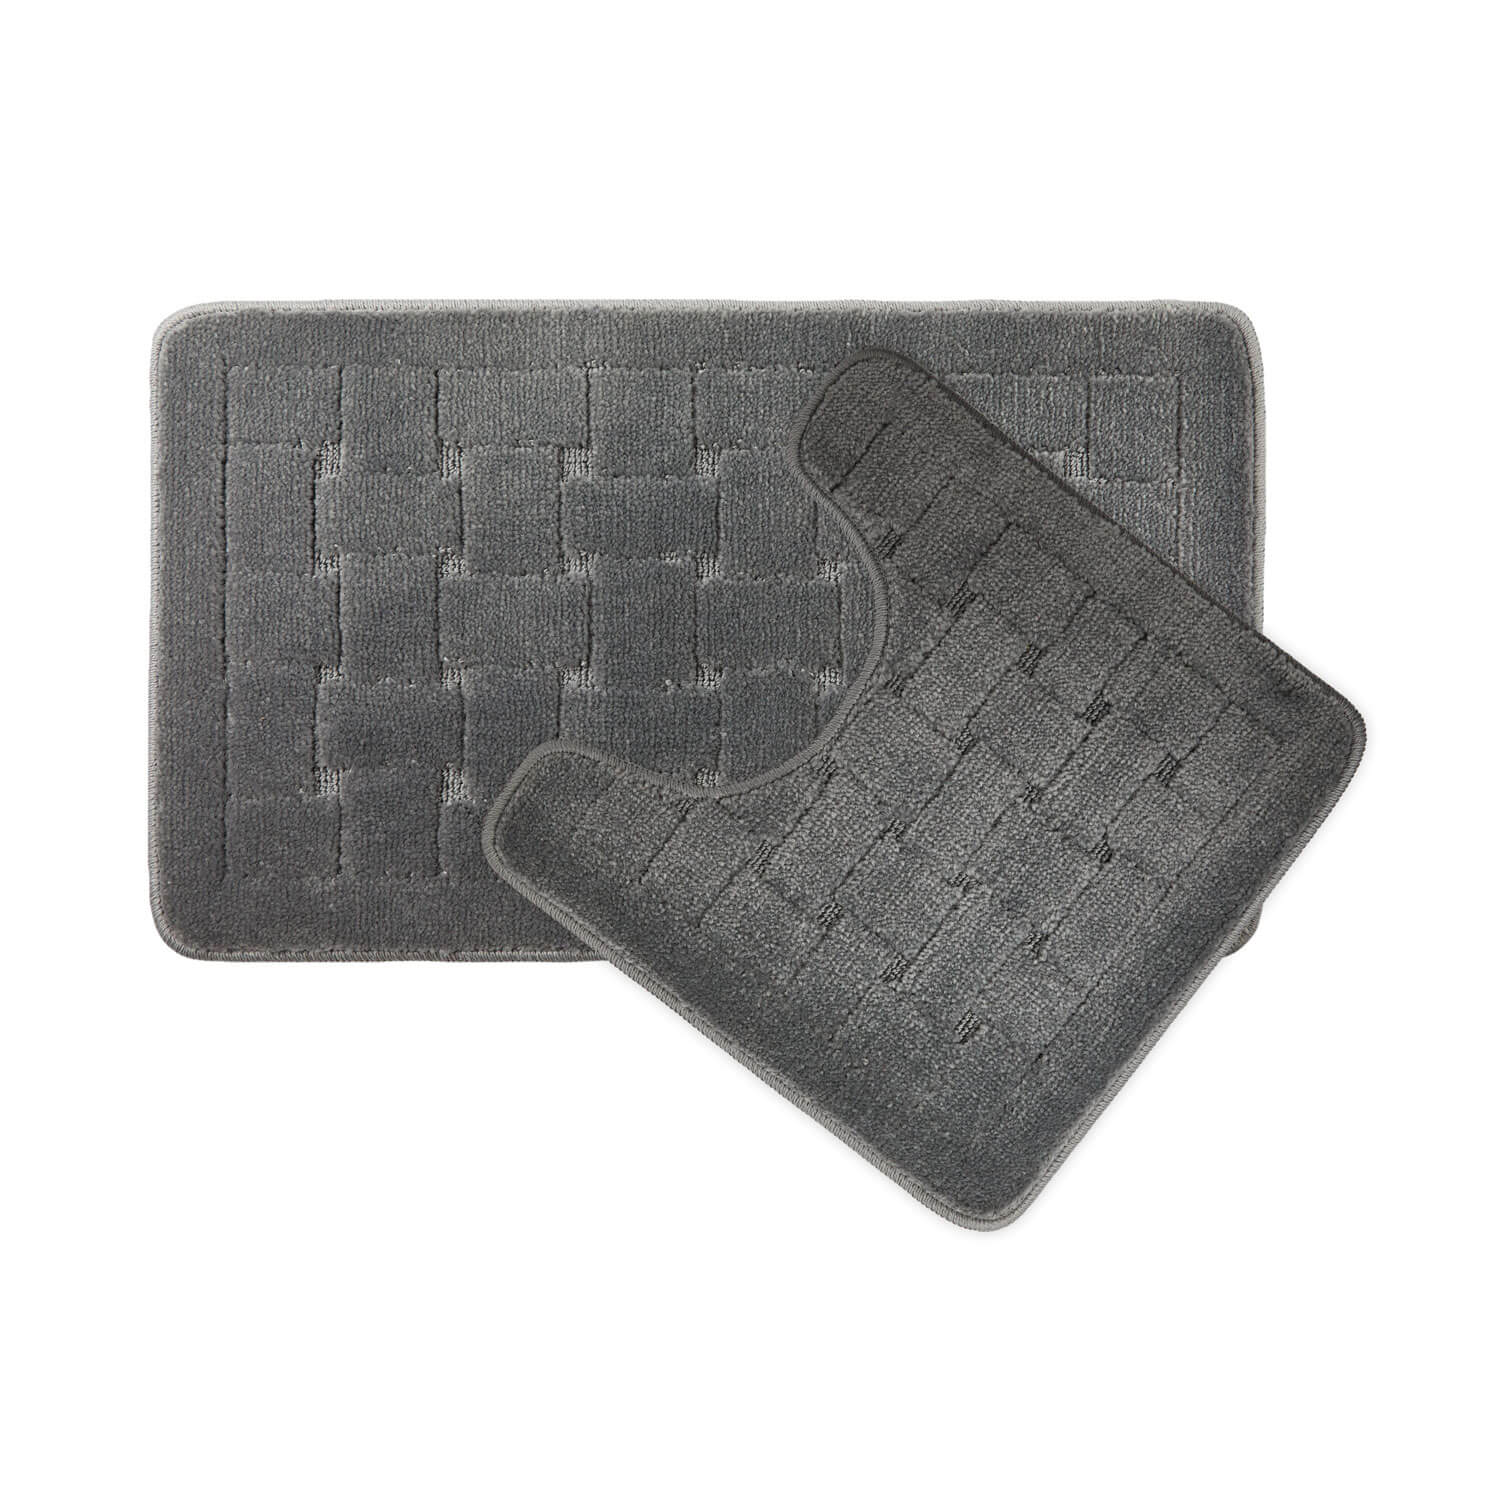 The Home Bathroom Orkney Bath Mat Set - Silver 1 Shaws Department Stores